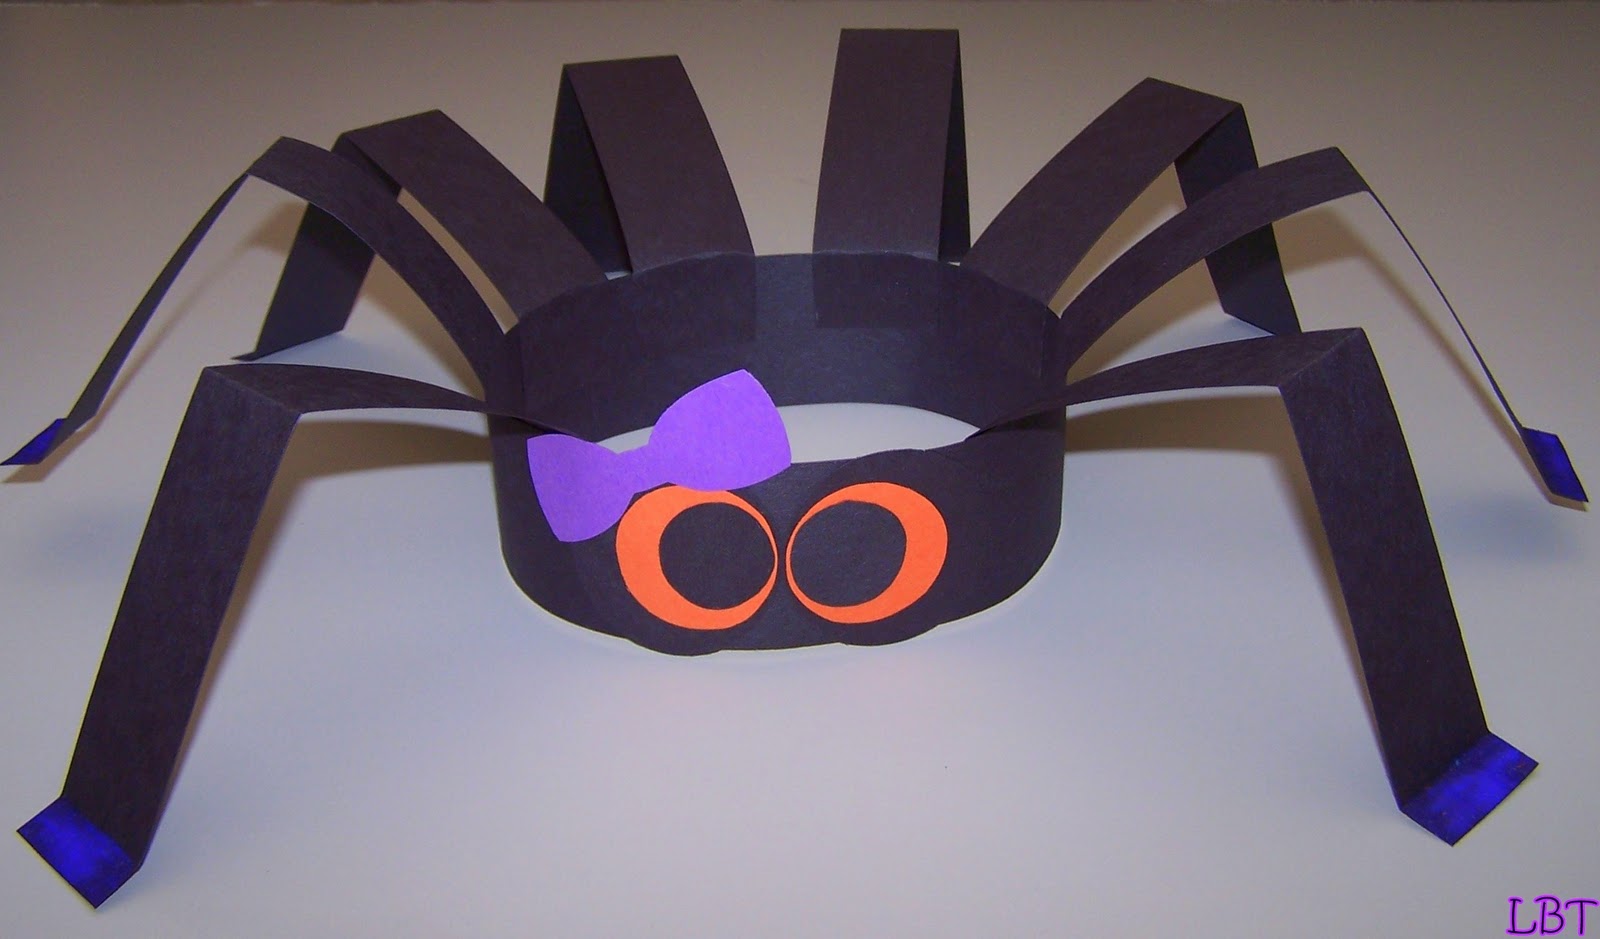  Craft  Ideas  With Construction  Paper  Paper  Crafts  Ideas  